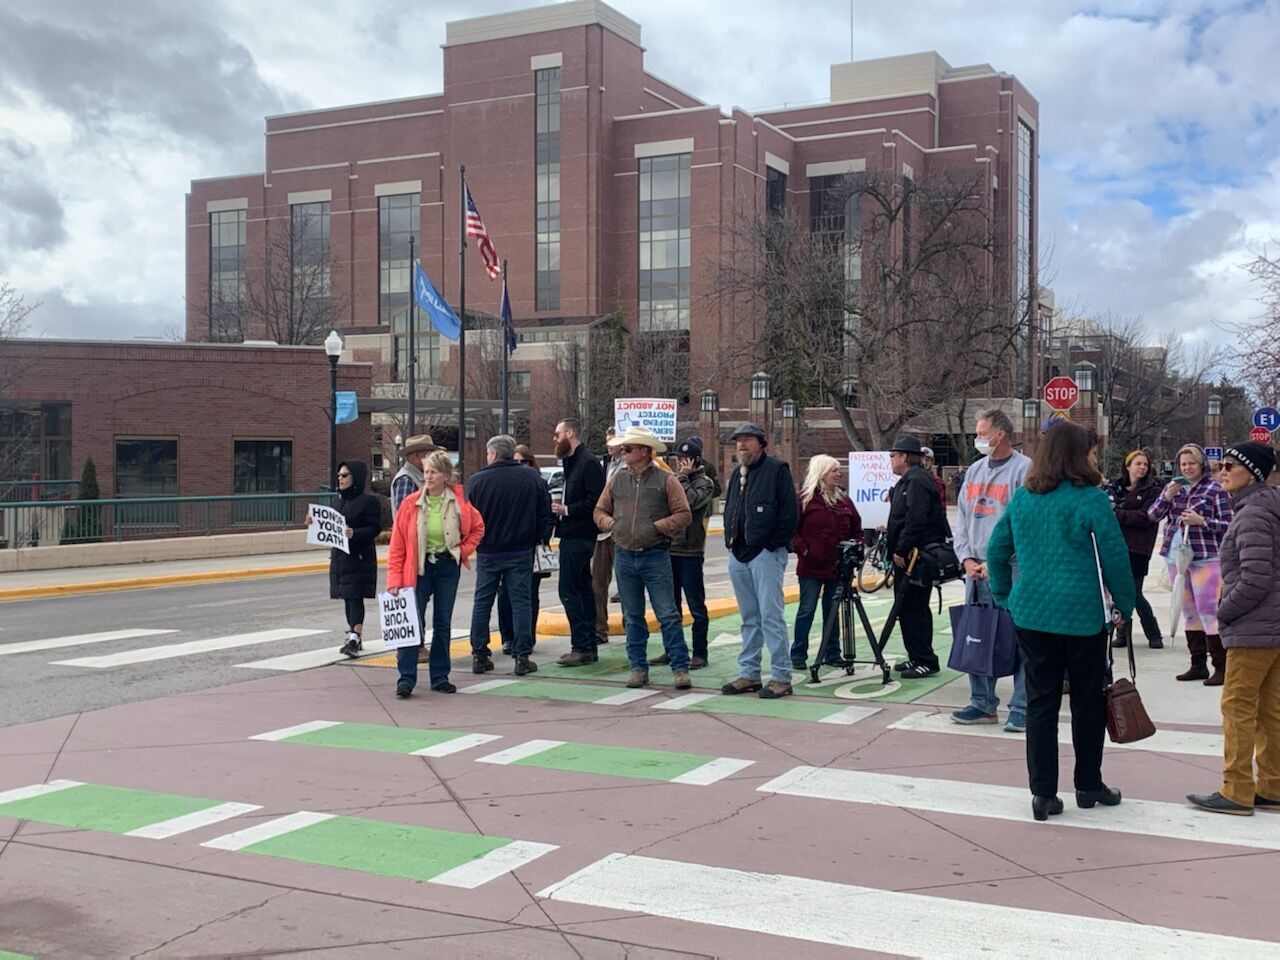 Protest at St. Luke's over 'medical kidnapping' | News | idahopress.com